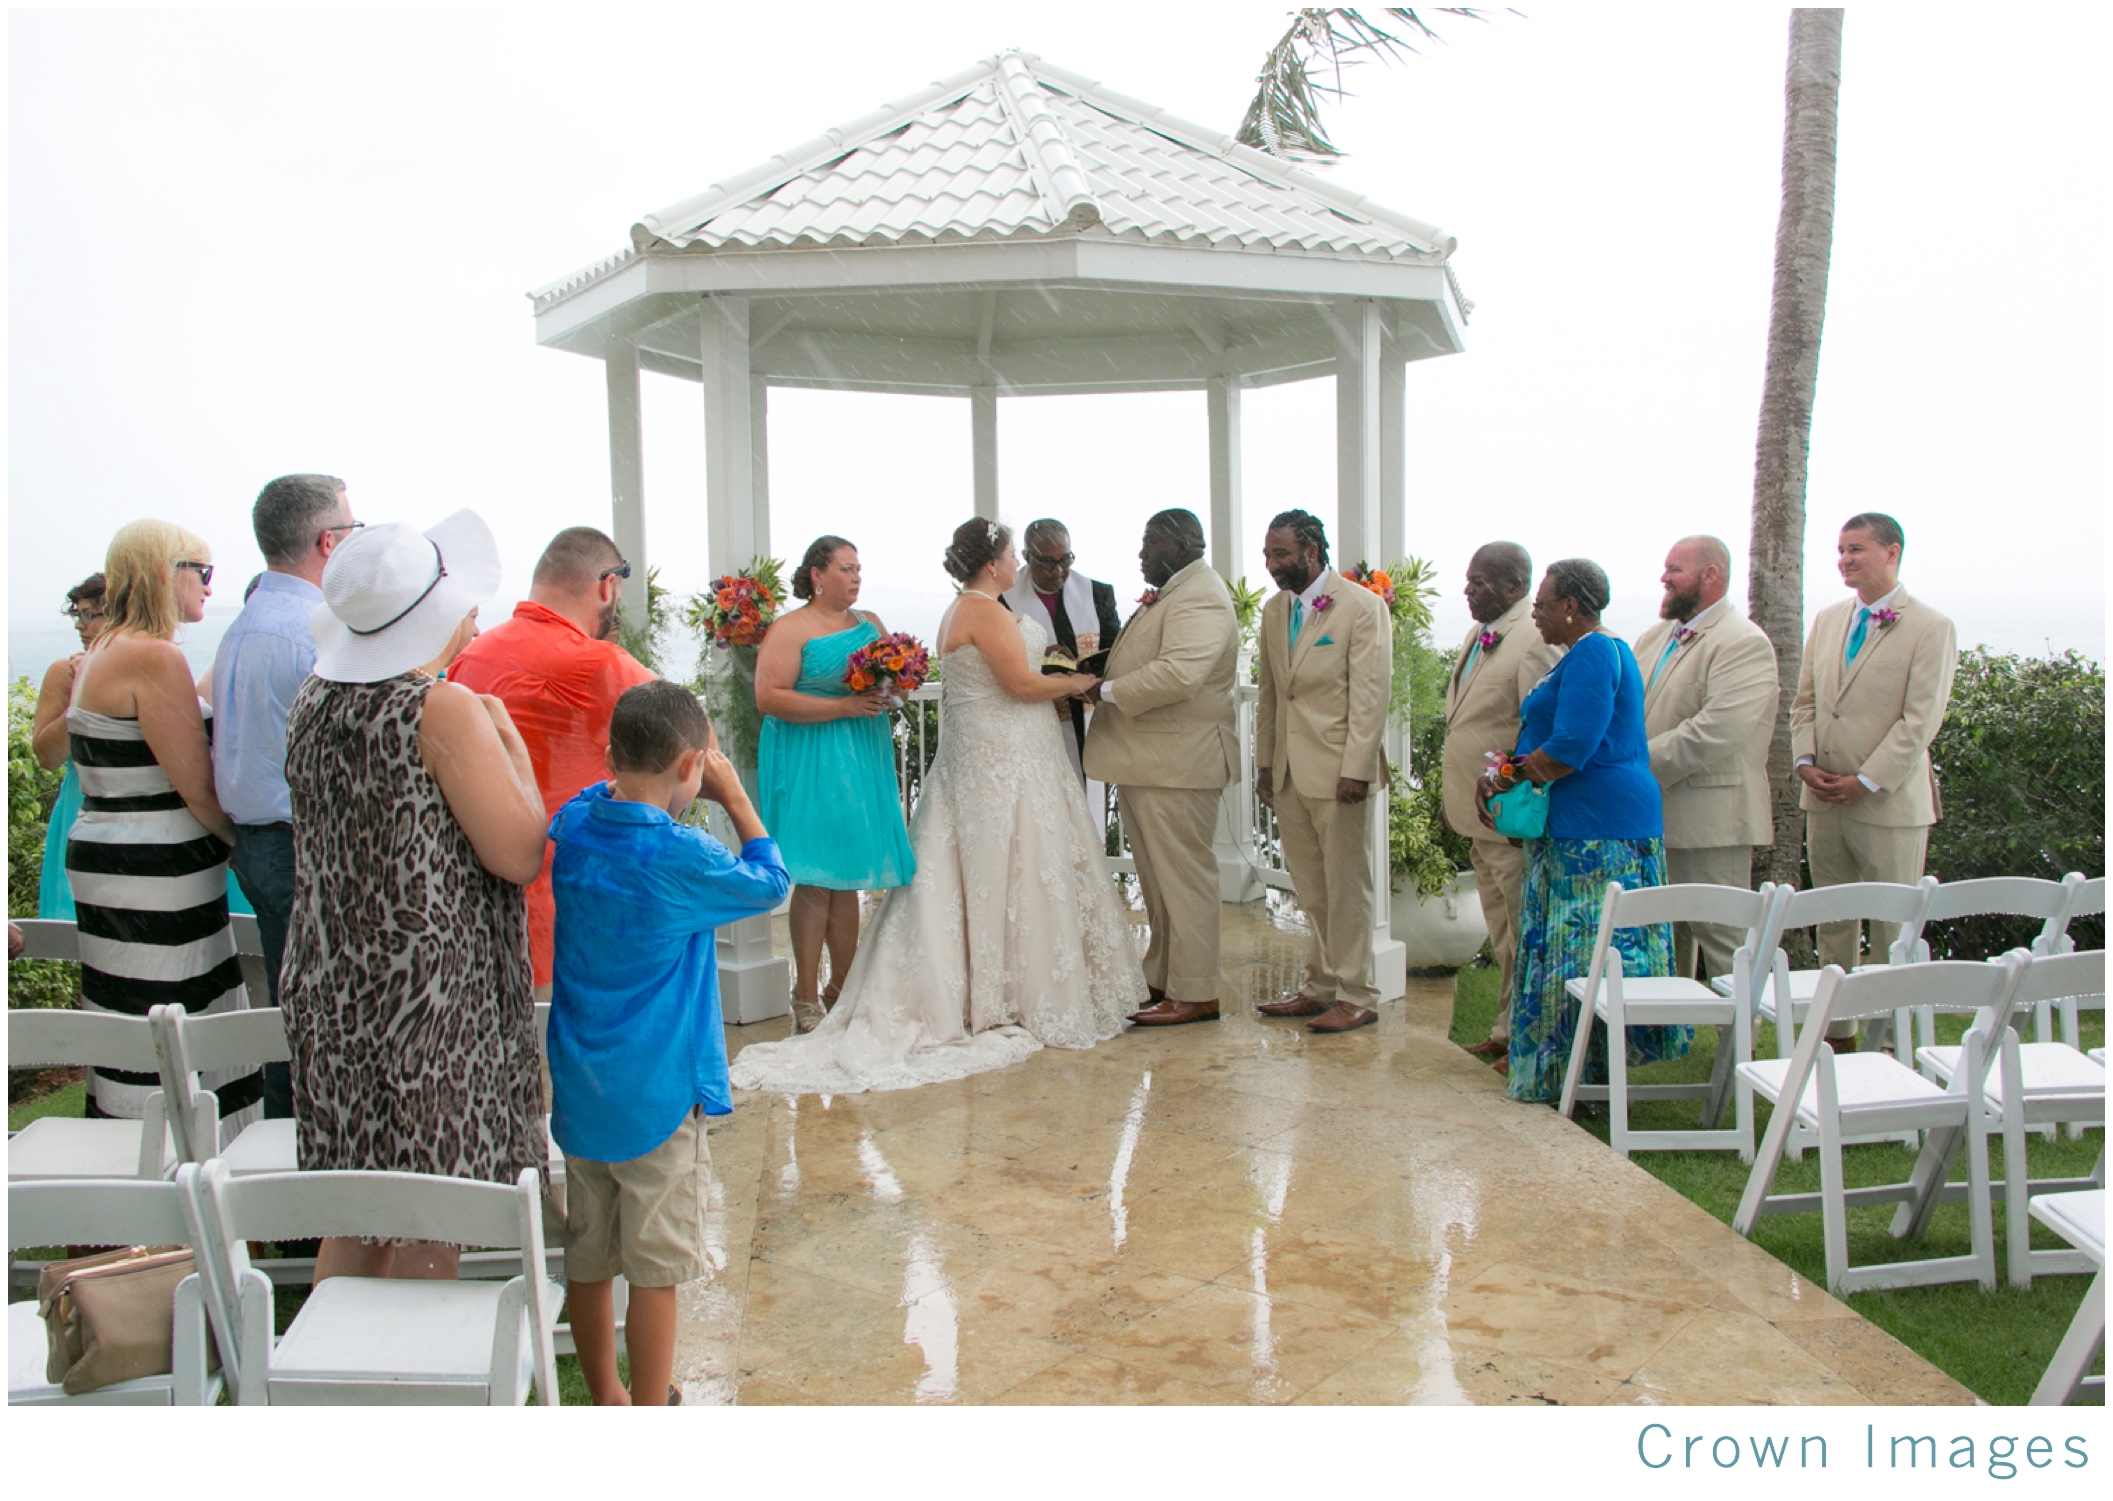 st thomas wedding photos at the marriott crown images_1701.jpg